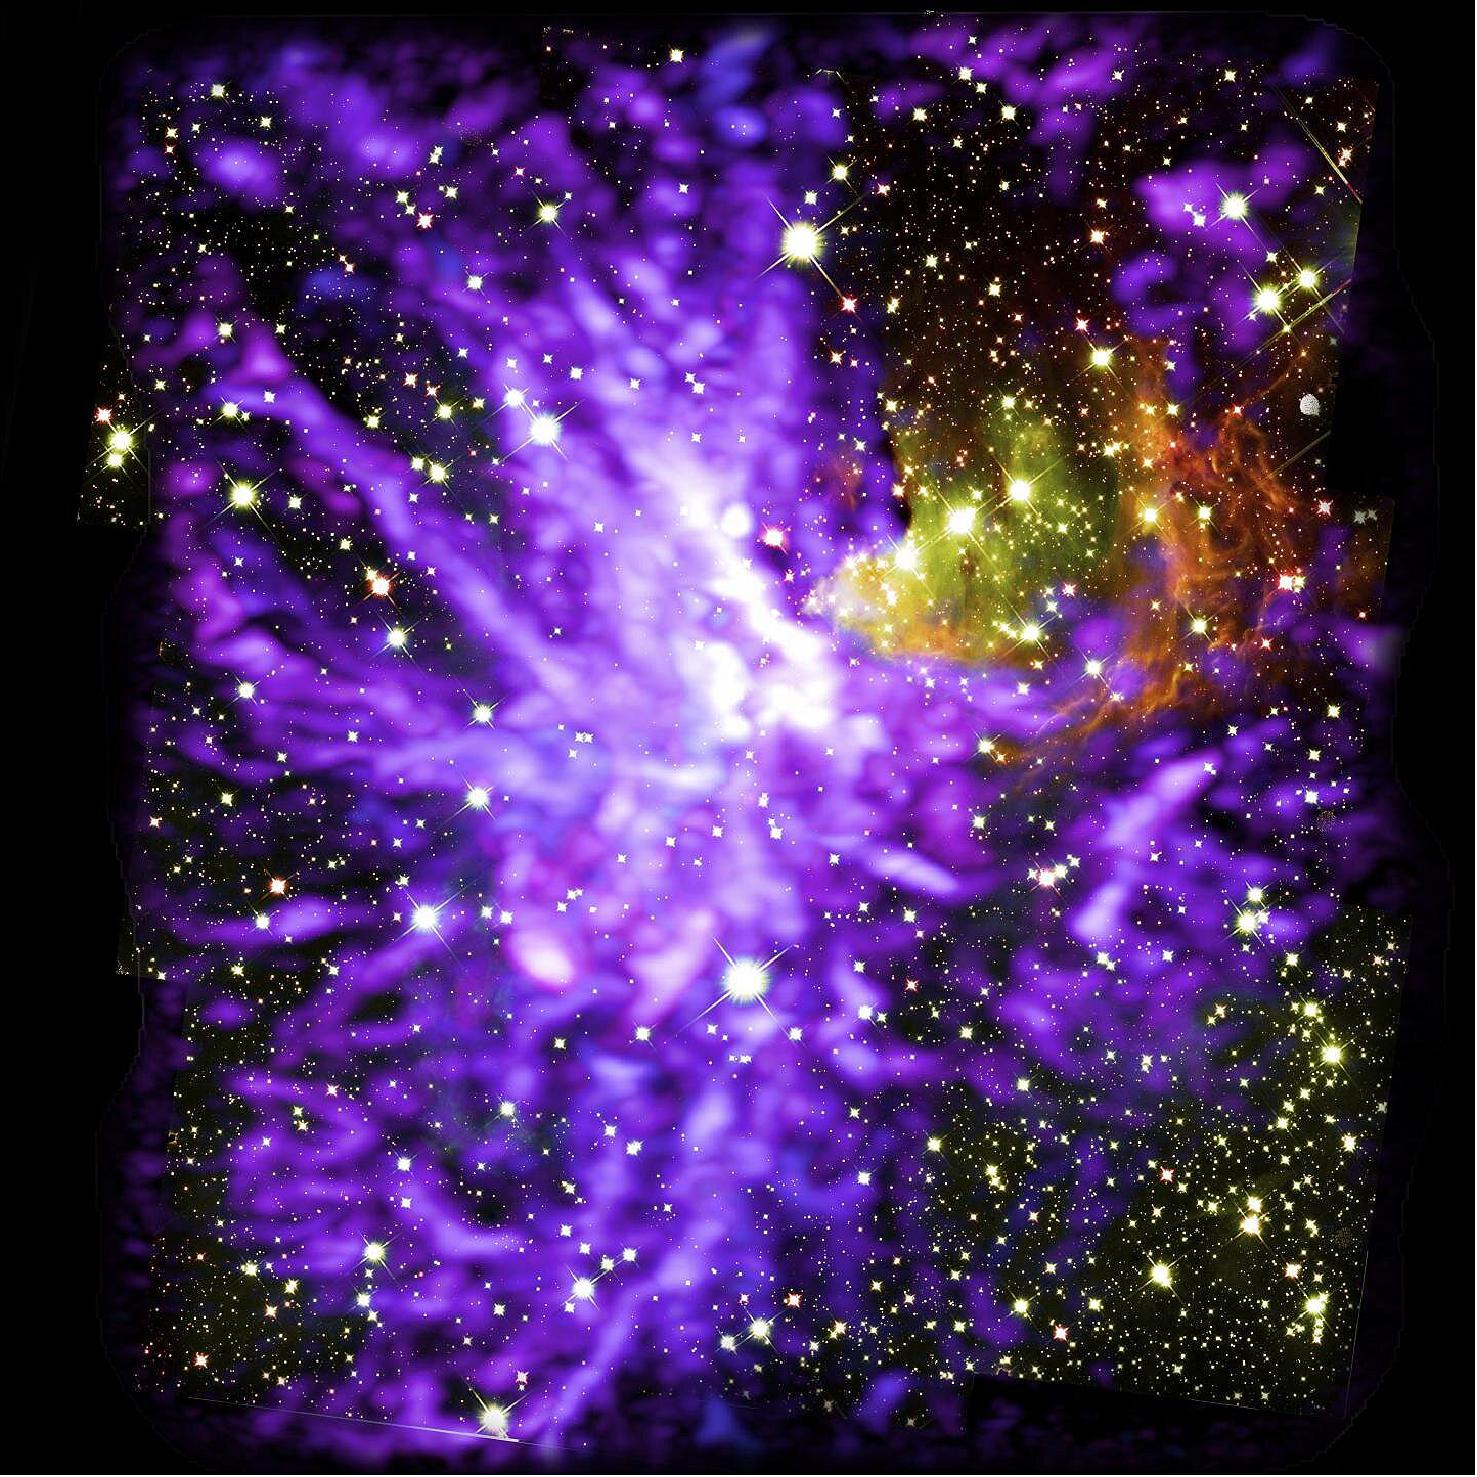 Figure 54: Star cluster G286.21+0.17, caught in the act of formation. This is a multiwavelength mosaic of more than 750 ALMA radio images, and 9 Hubble infrared images. ALMA shows molecular clouds (purple) and Hubble shows stars and glowing dust (yellow and red), image credit: ALMA (ESO/NAOJ/NRAO), Y. Cheng et al.; NRAO/AUI/NSF, S. Dagnello; NASA/ESA Hubble)